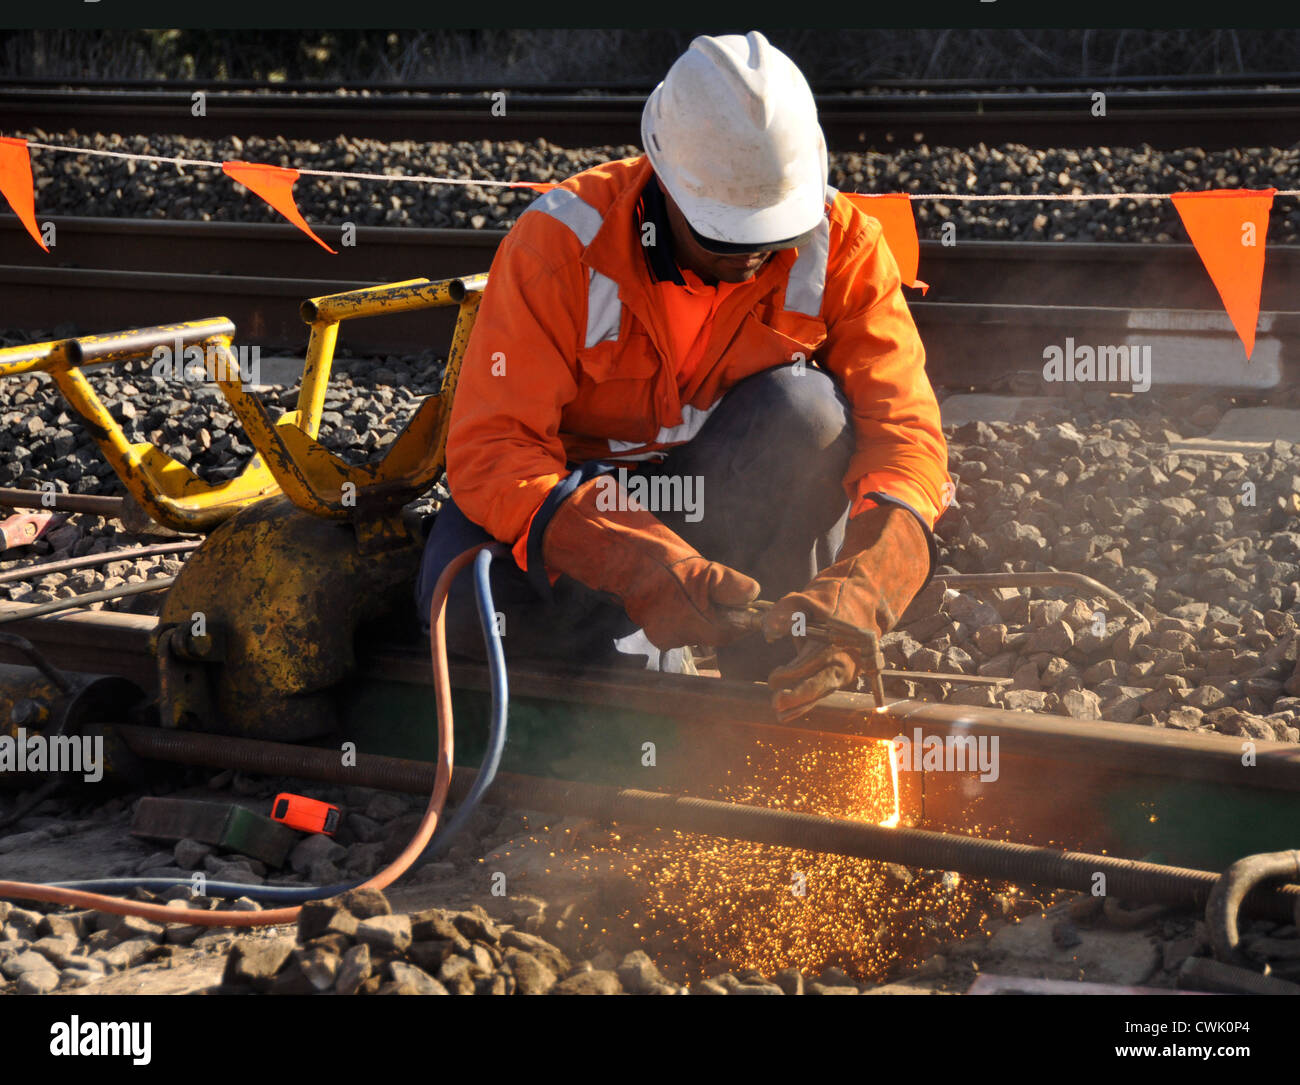 Worker using Oxyacetylene gas to weld in sheet metal factory - Stock Image  - F022/1036 - Science Photo Library